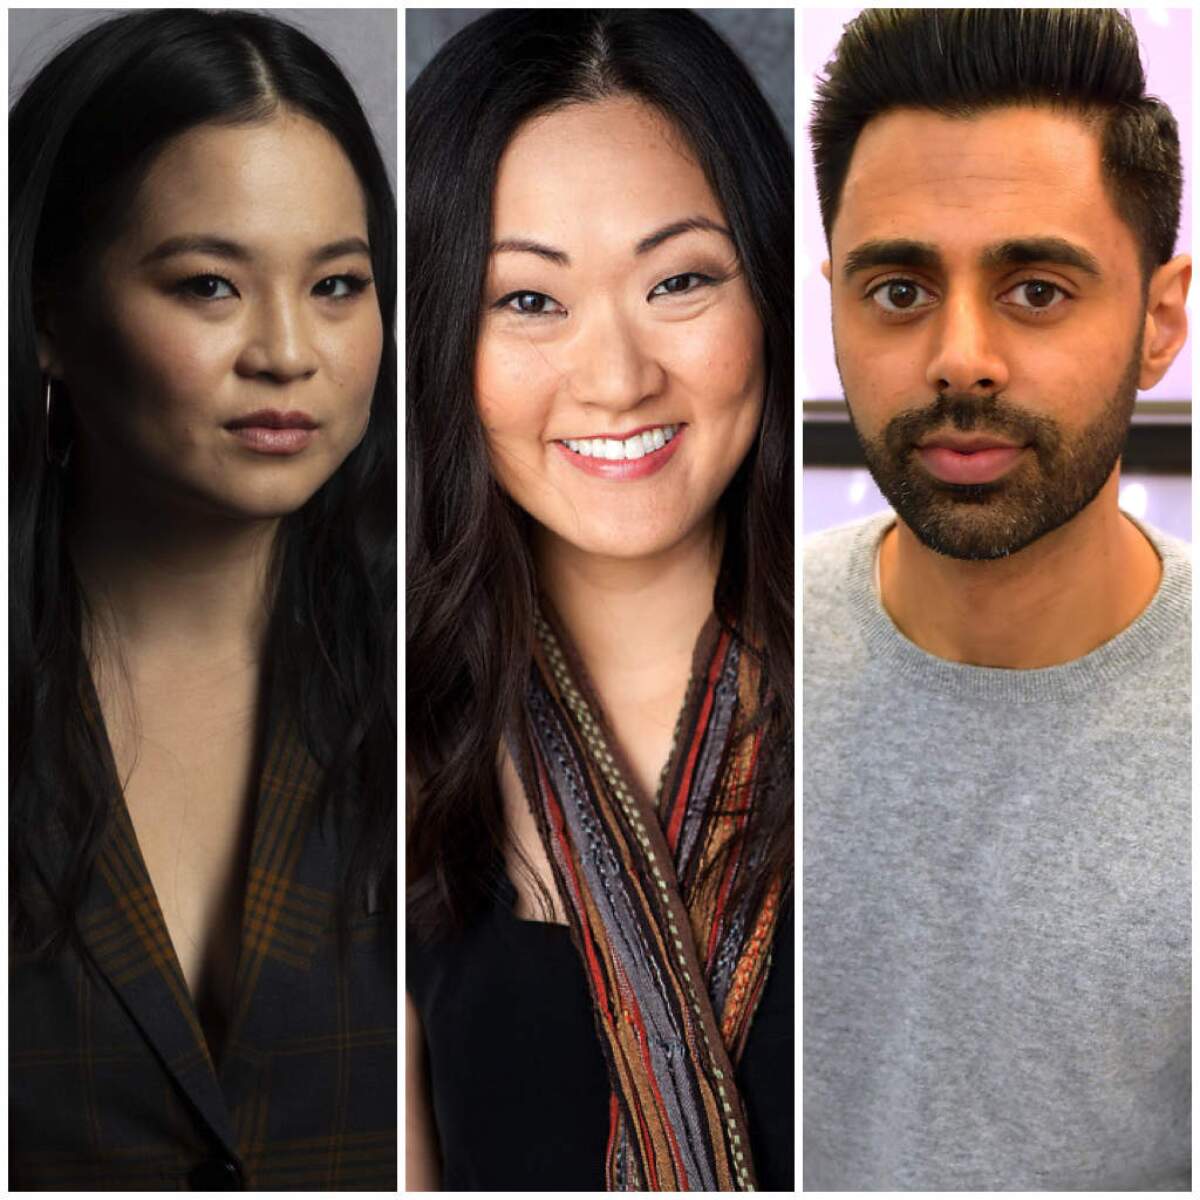 A photo triptych of Kelly Marie Tran, Jully Lee and Hasan Minhaj. 